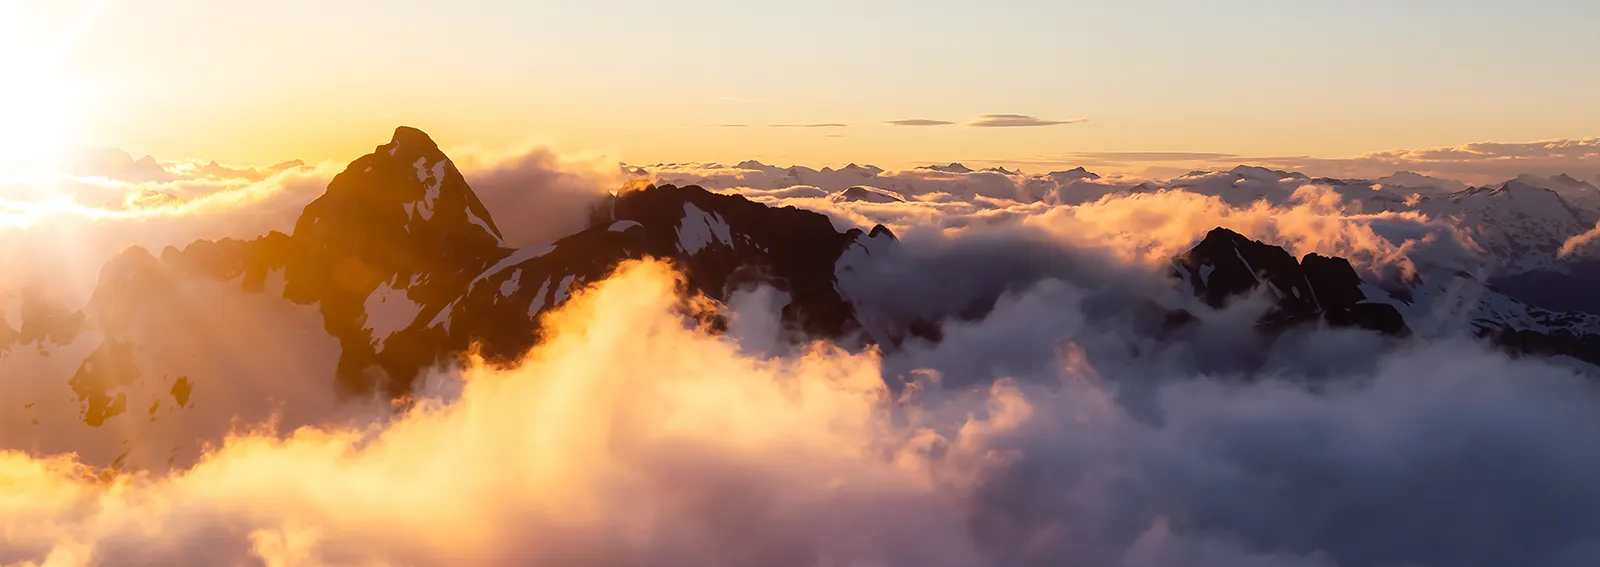 Mountain peaking through the clouds in a sunrise